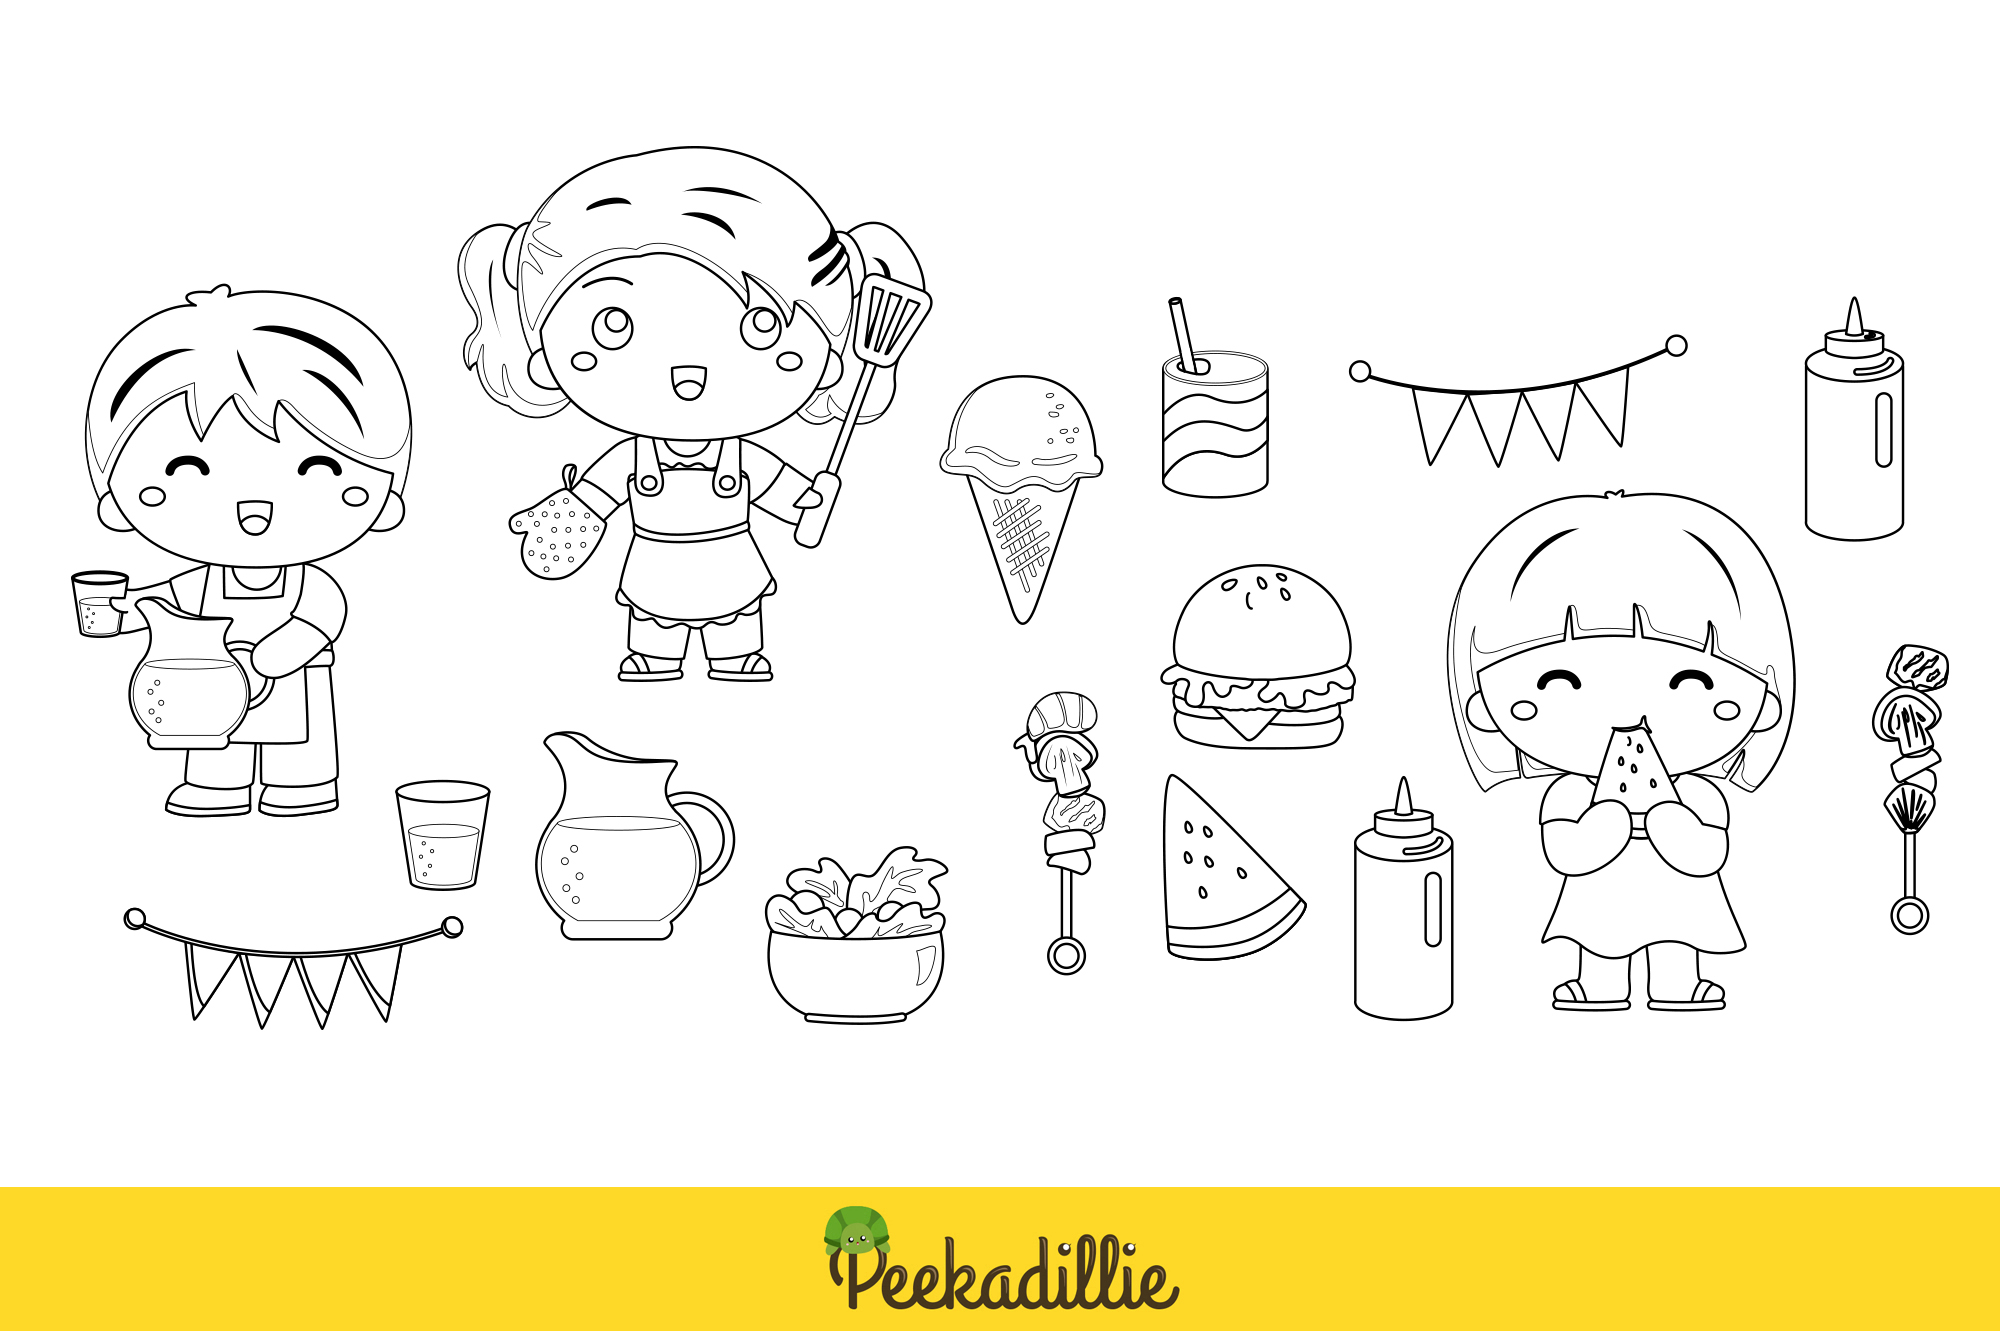 Drawing of a girl and boy eating ice cream.